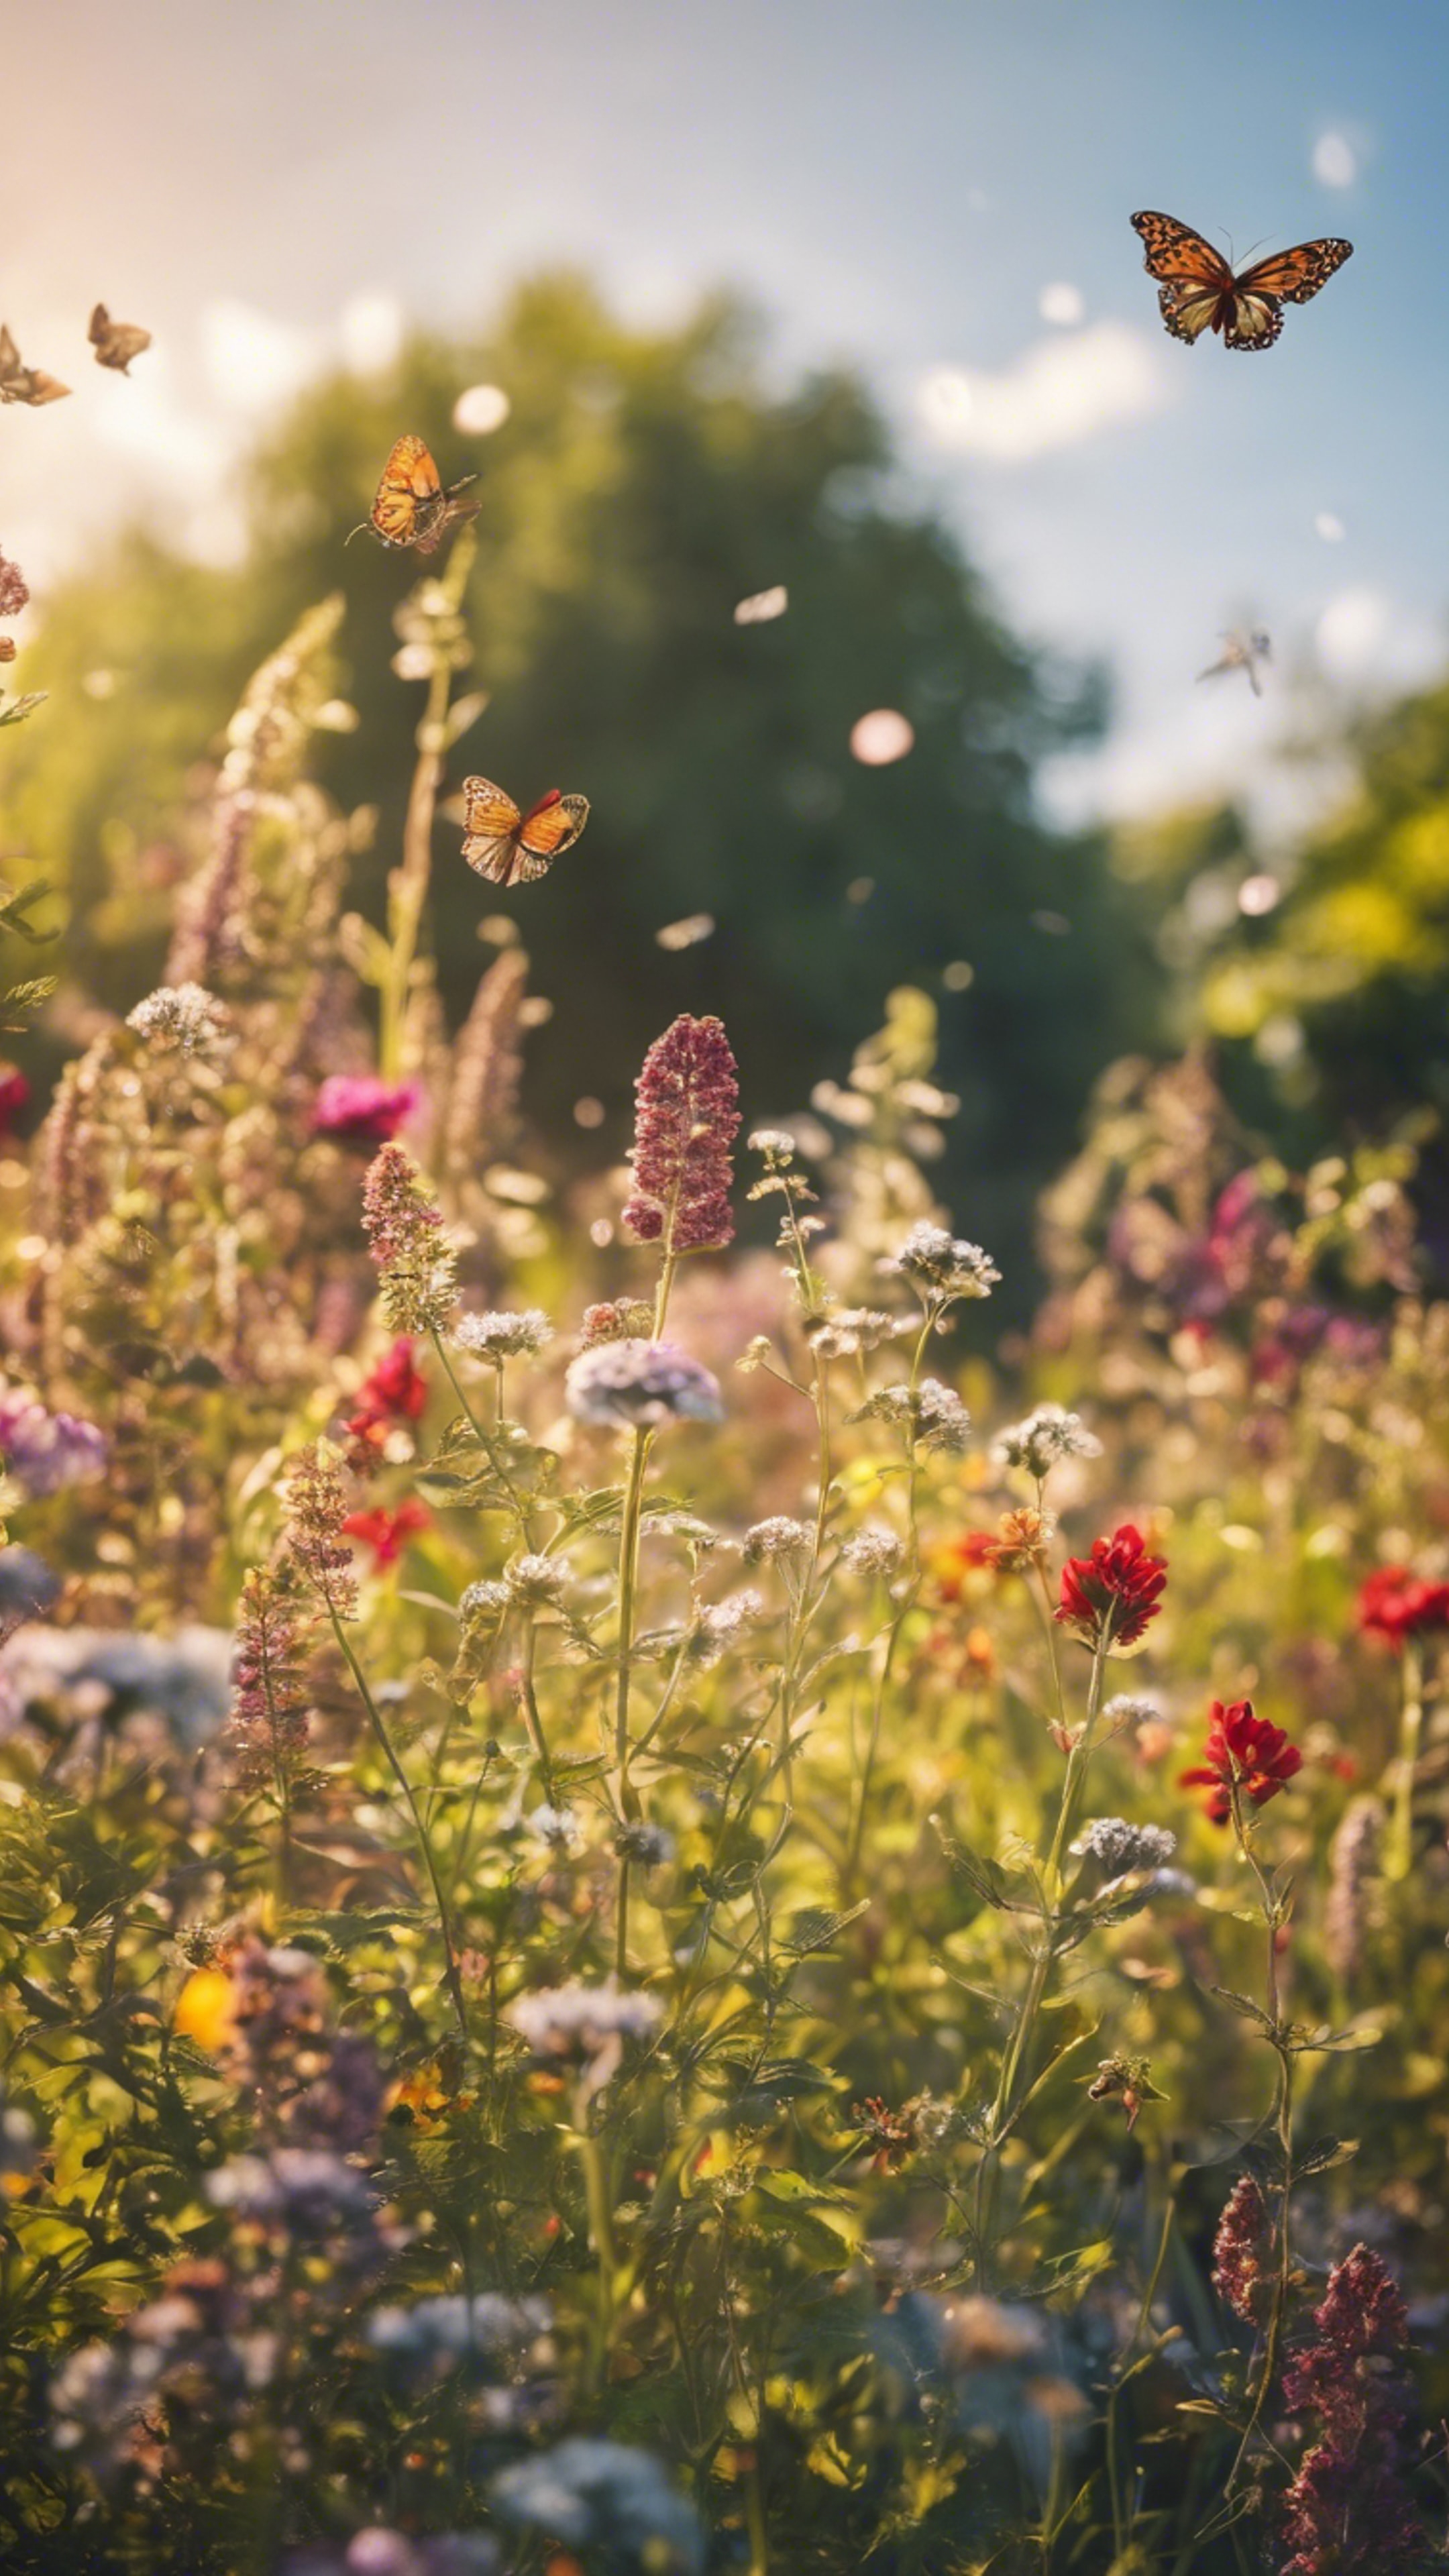 A colorful scene of a French country garden bursting with wildflowers and butterflies under a warm afternoon sun. Sfondo[d1166188c03b4b319ebf]